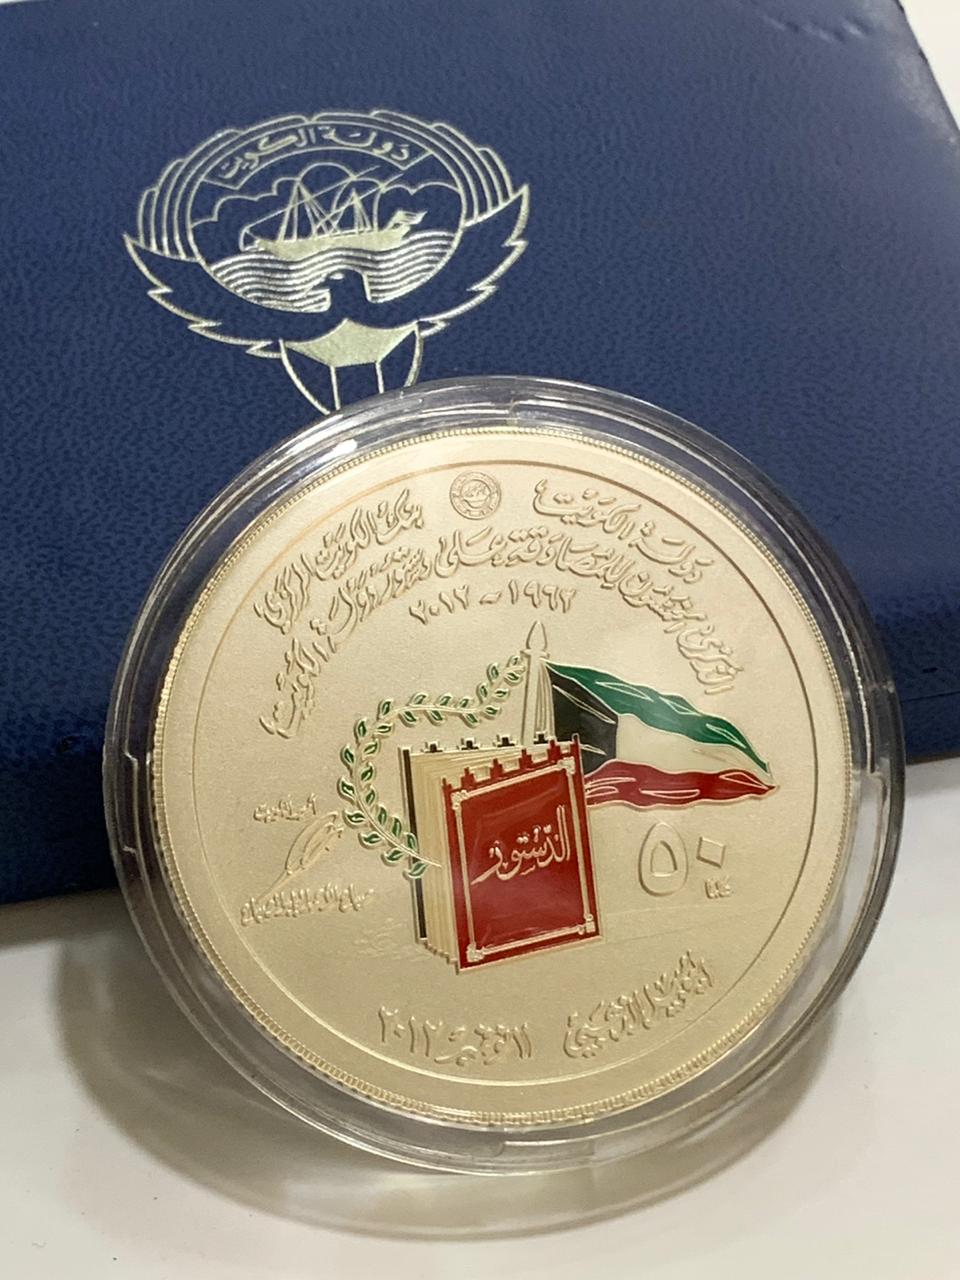 2012 Kuwait 50th Anniversary of the Enactment of the Constitution Coin Medal